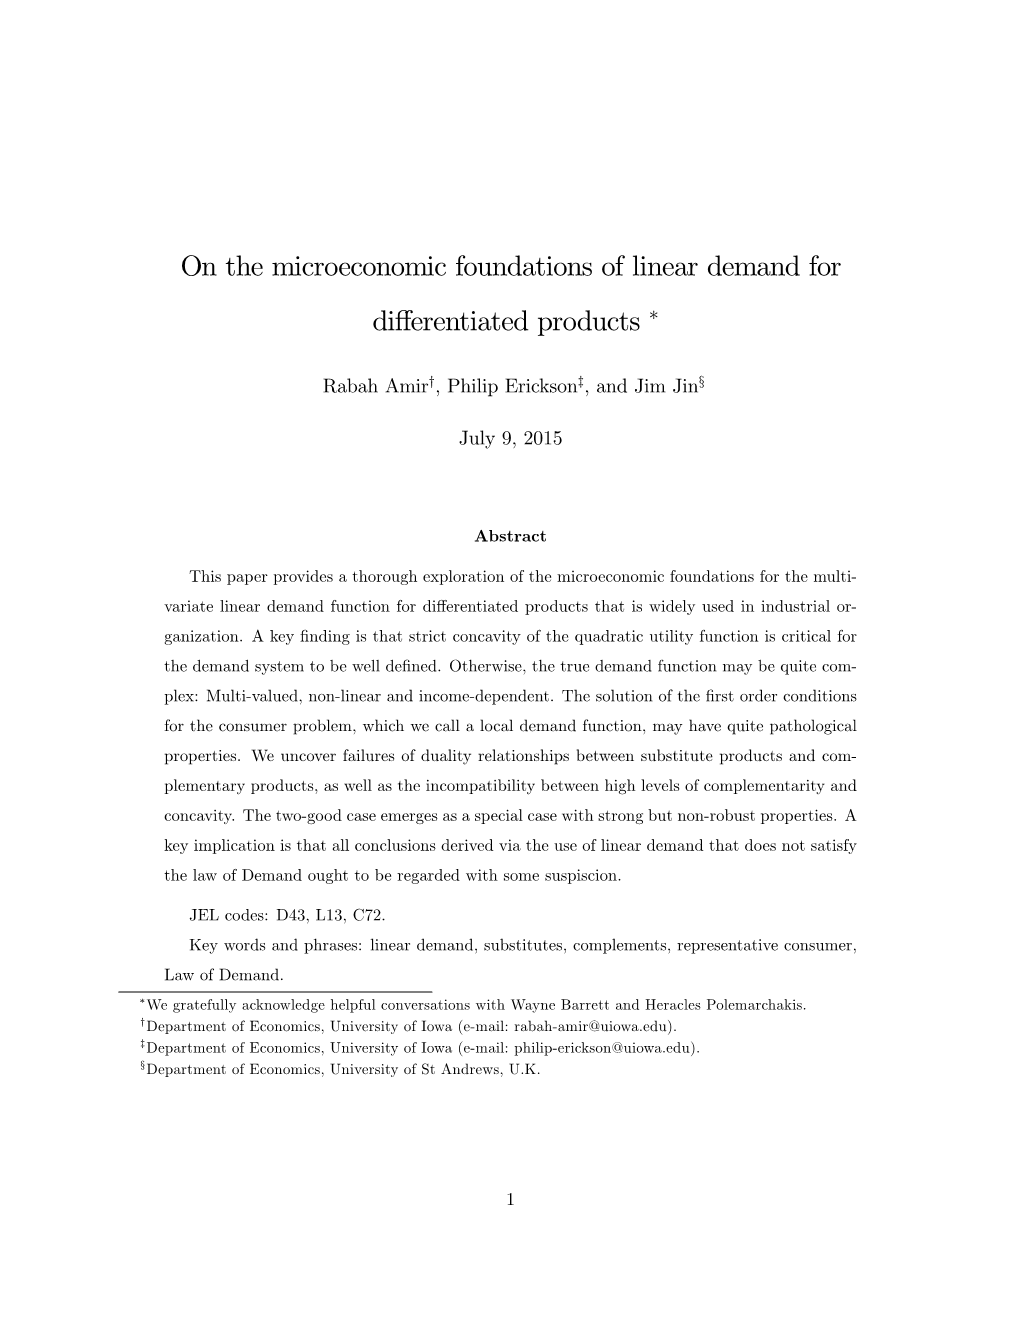 On the Microeconomic Foundations of Linear Demand for Differentiated